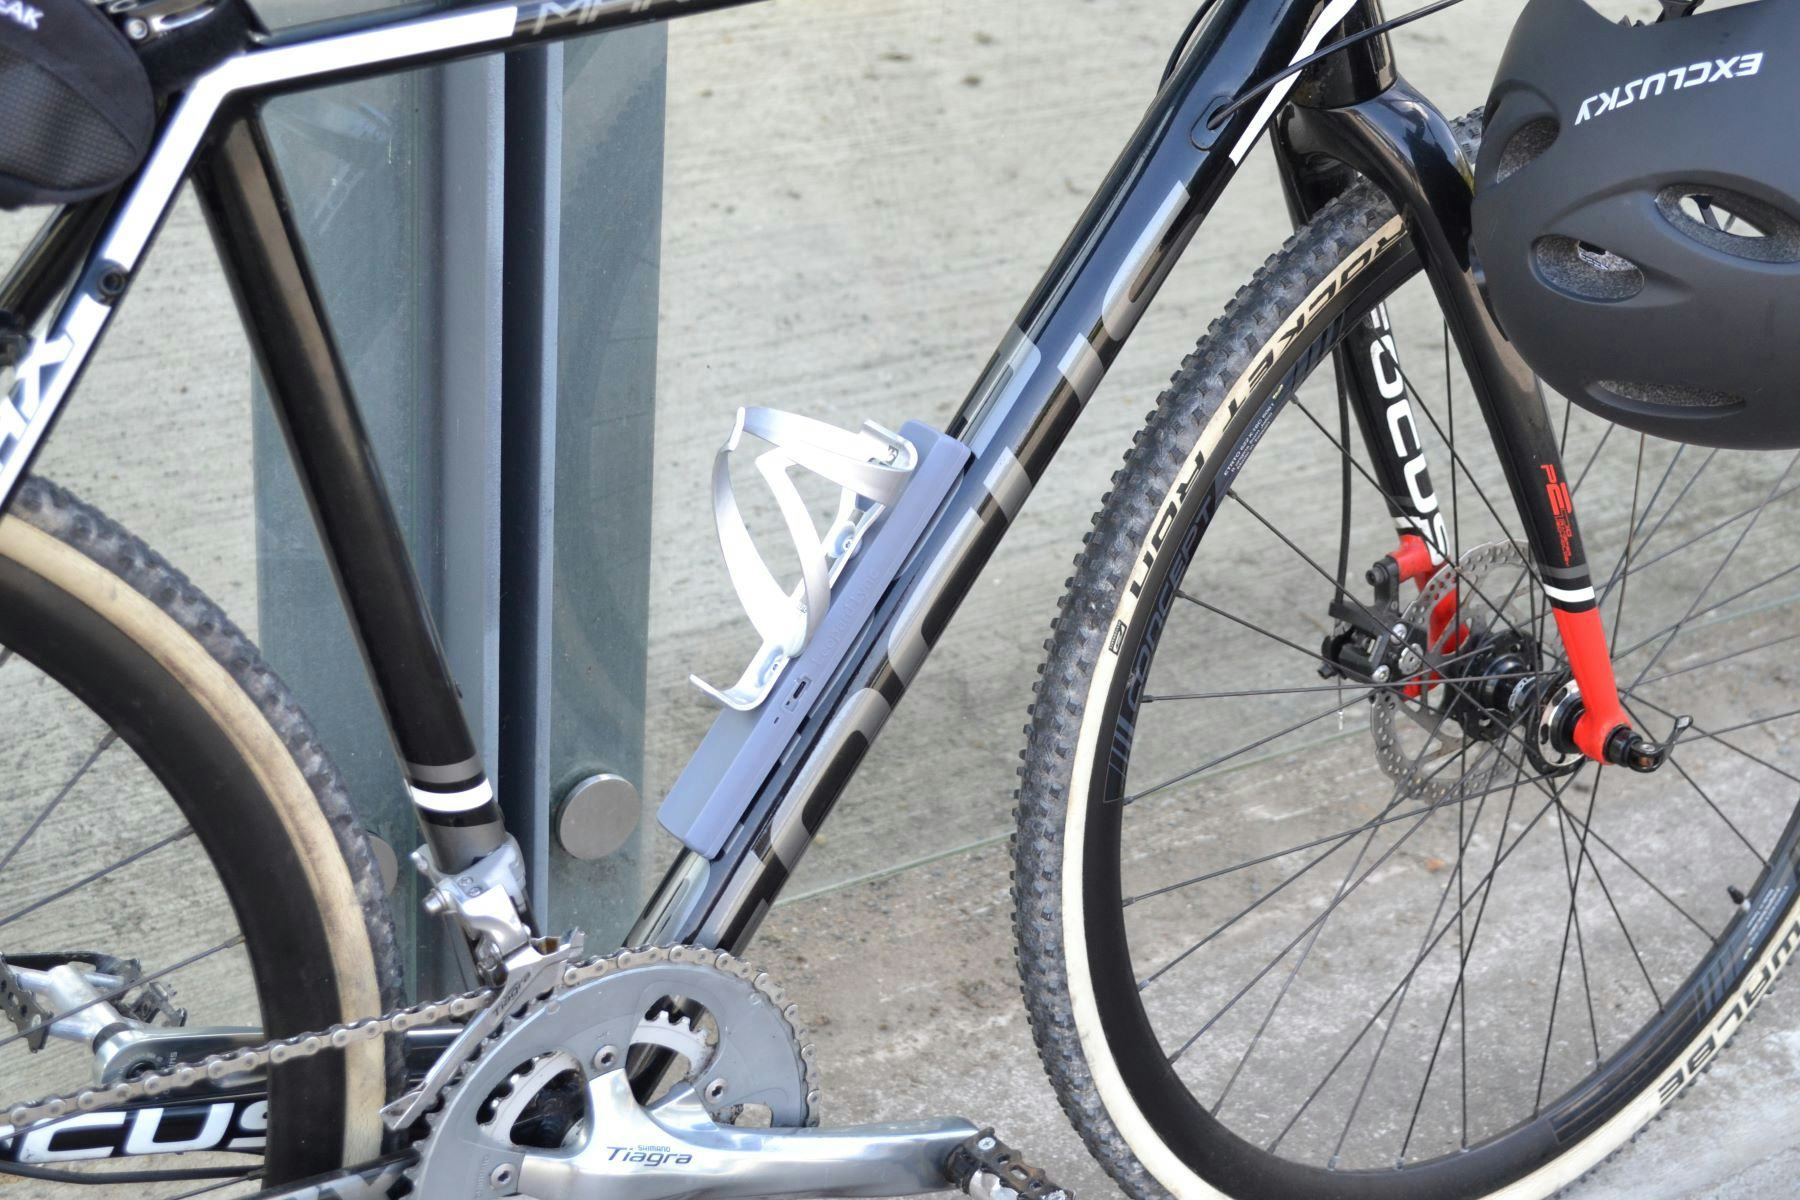 Launching this summer, the Leopard Lync connectivity solution can be fitted either externally, within a bottle cage like shown, or internally within the frame. - Photo Leopard Tech 